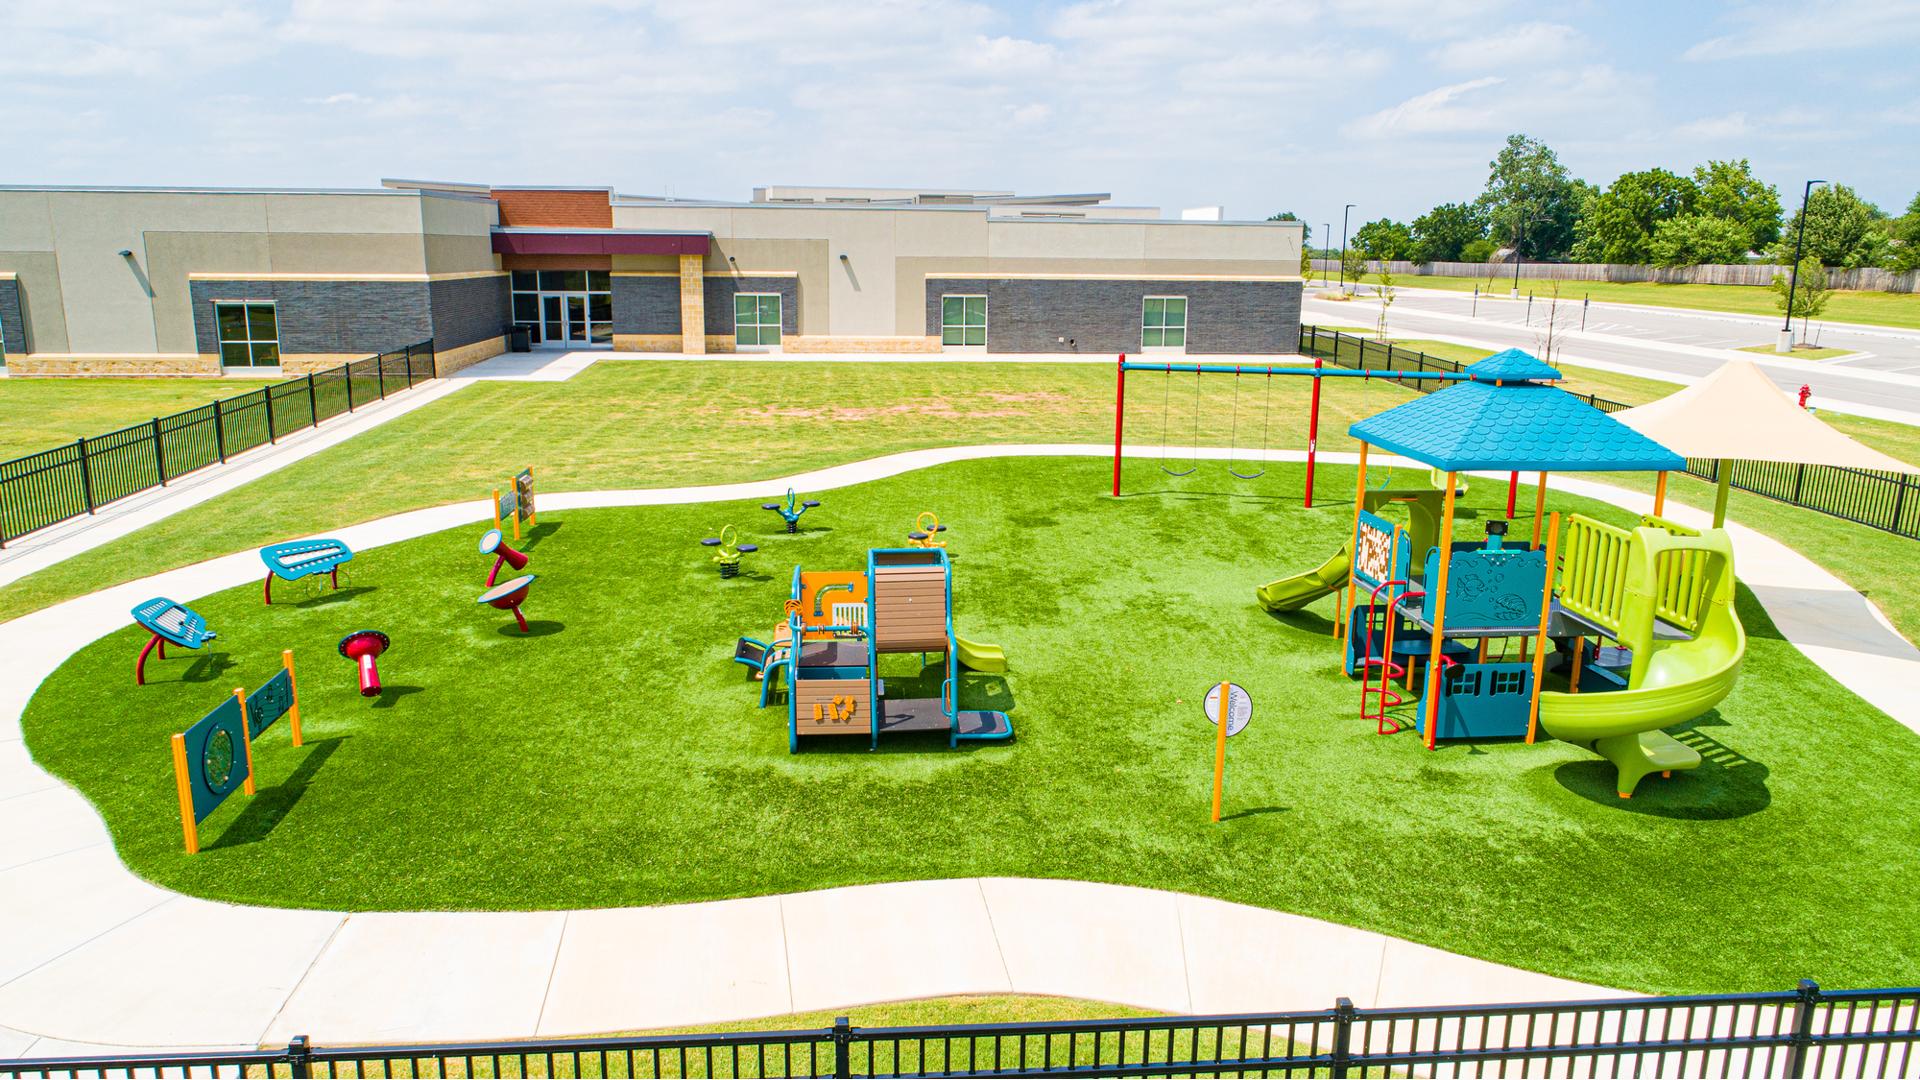 PlayShaper® playground at Lucile Ellingwood Morrow Elementary
Collinsville, OK